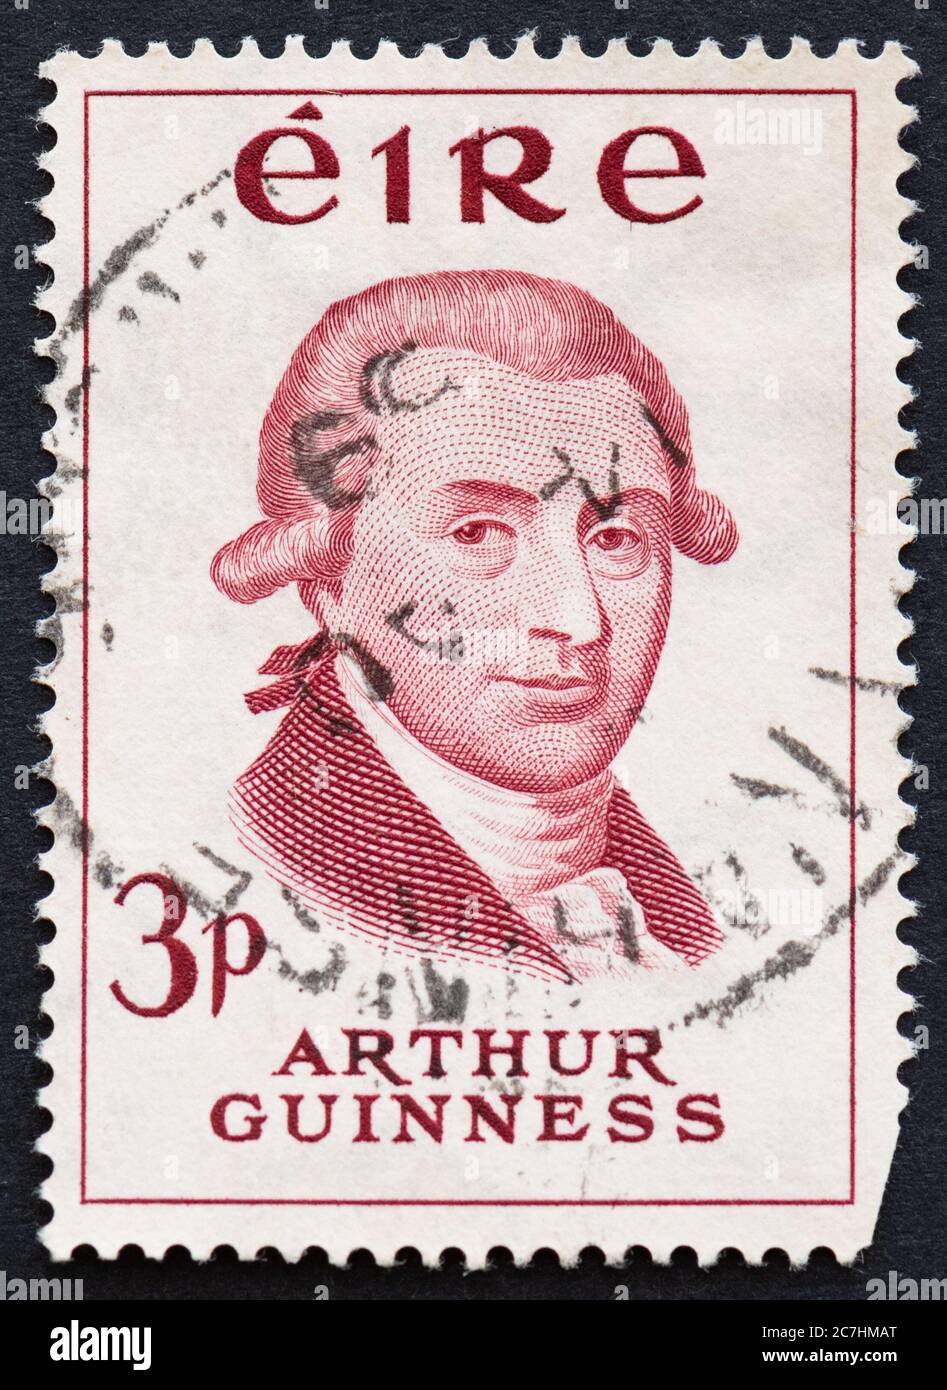 Arthur Guinness Eire Ireland commemorative 3p postage stamp issued in 1959 for the Guinnes Bicentenary Stock Photo